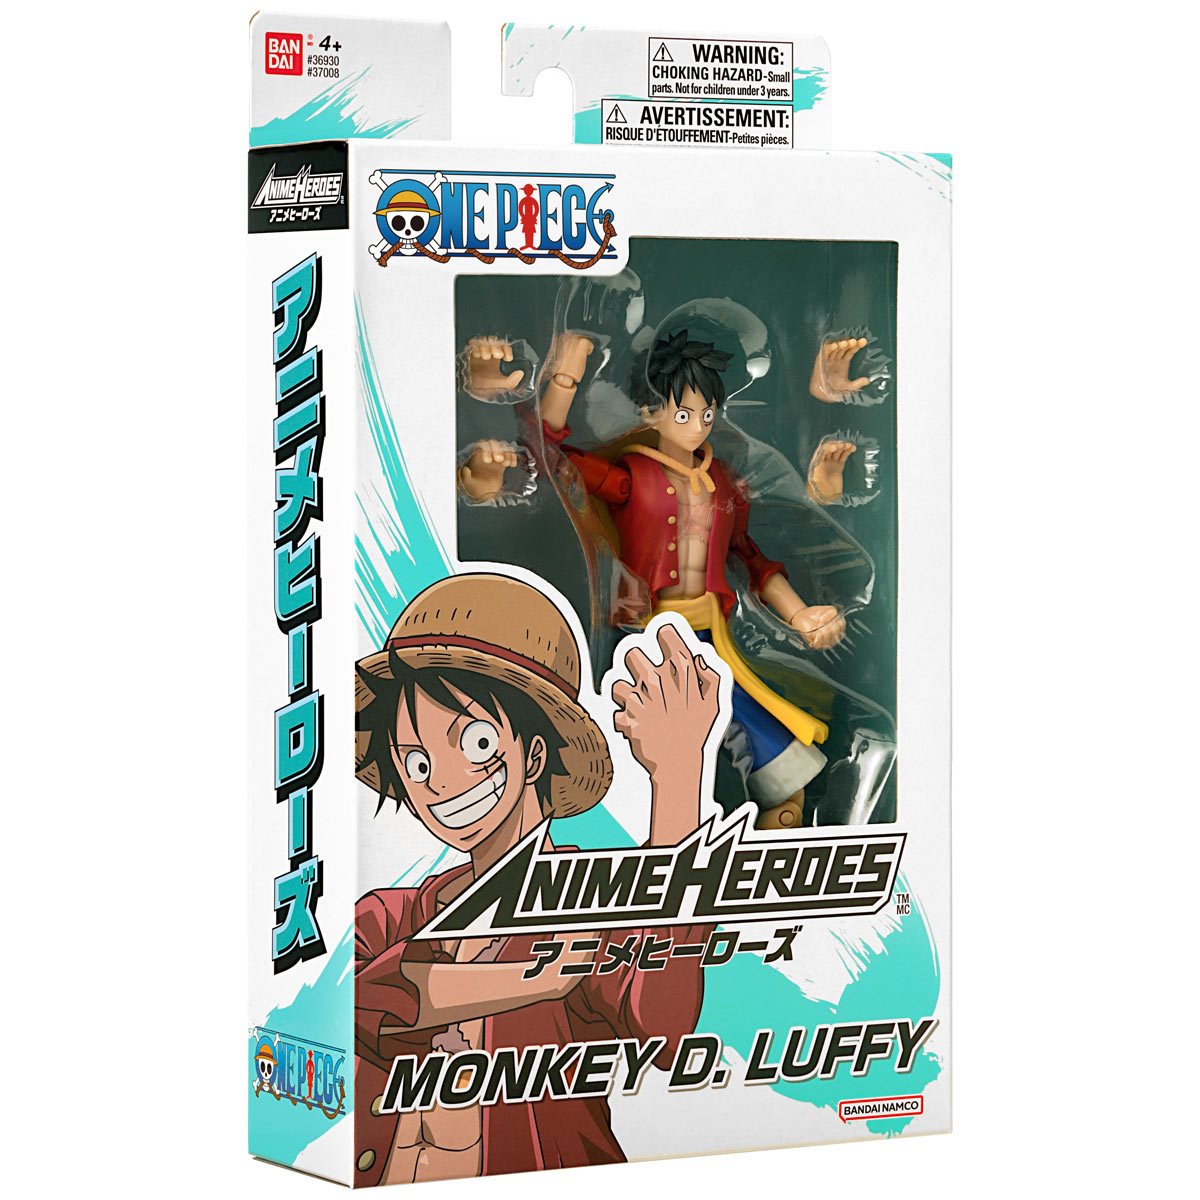 Anime Heroes Monkey D. Luffy One Piece Action Figure by Bandai 